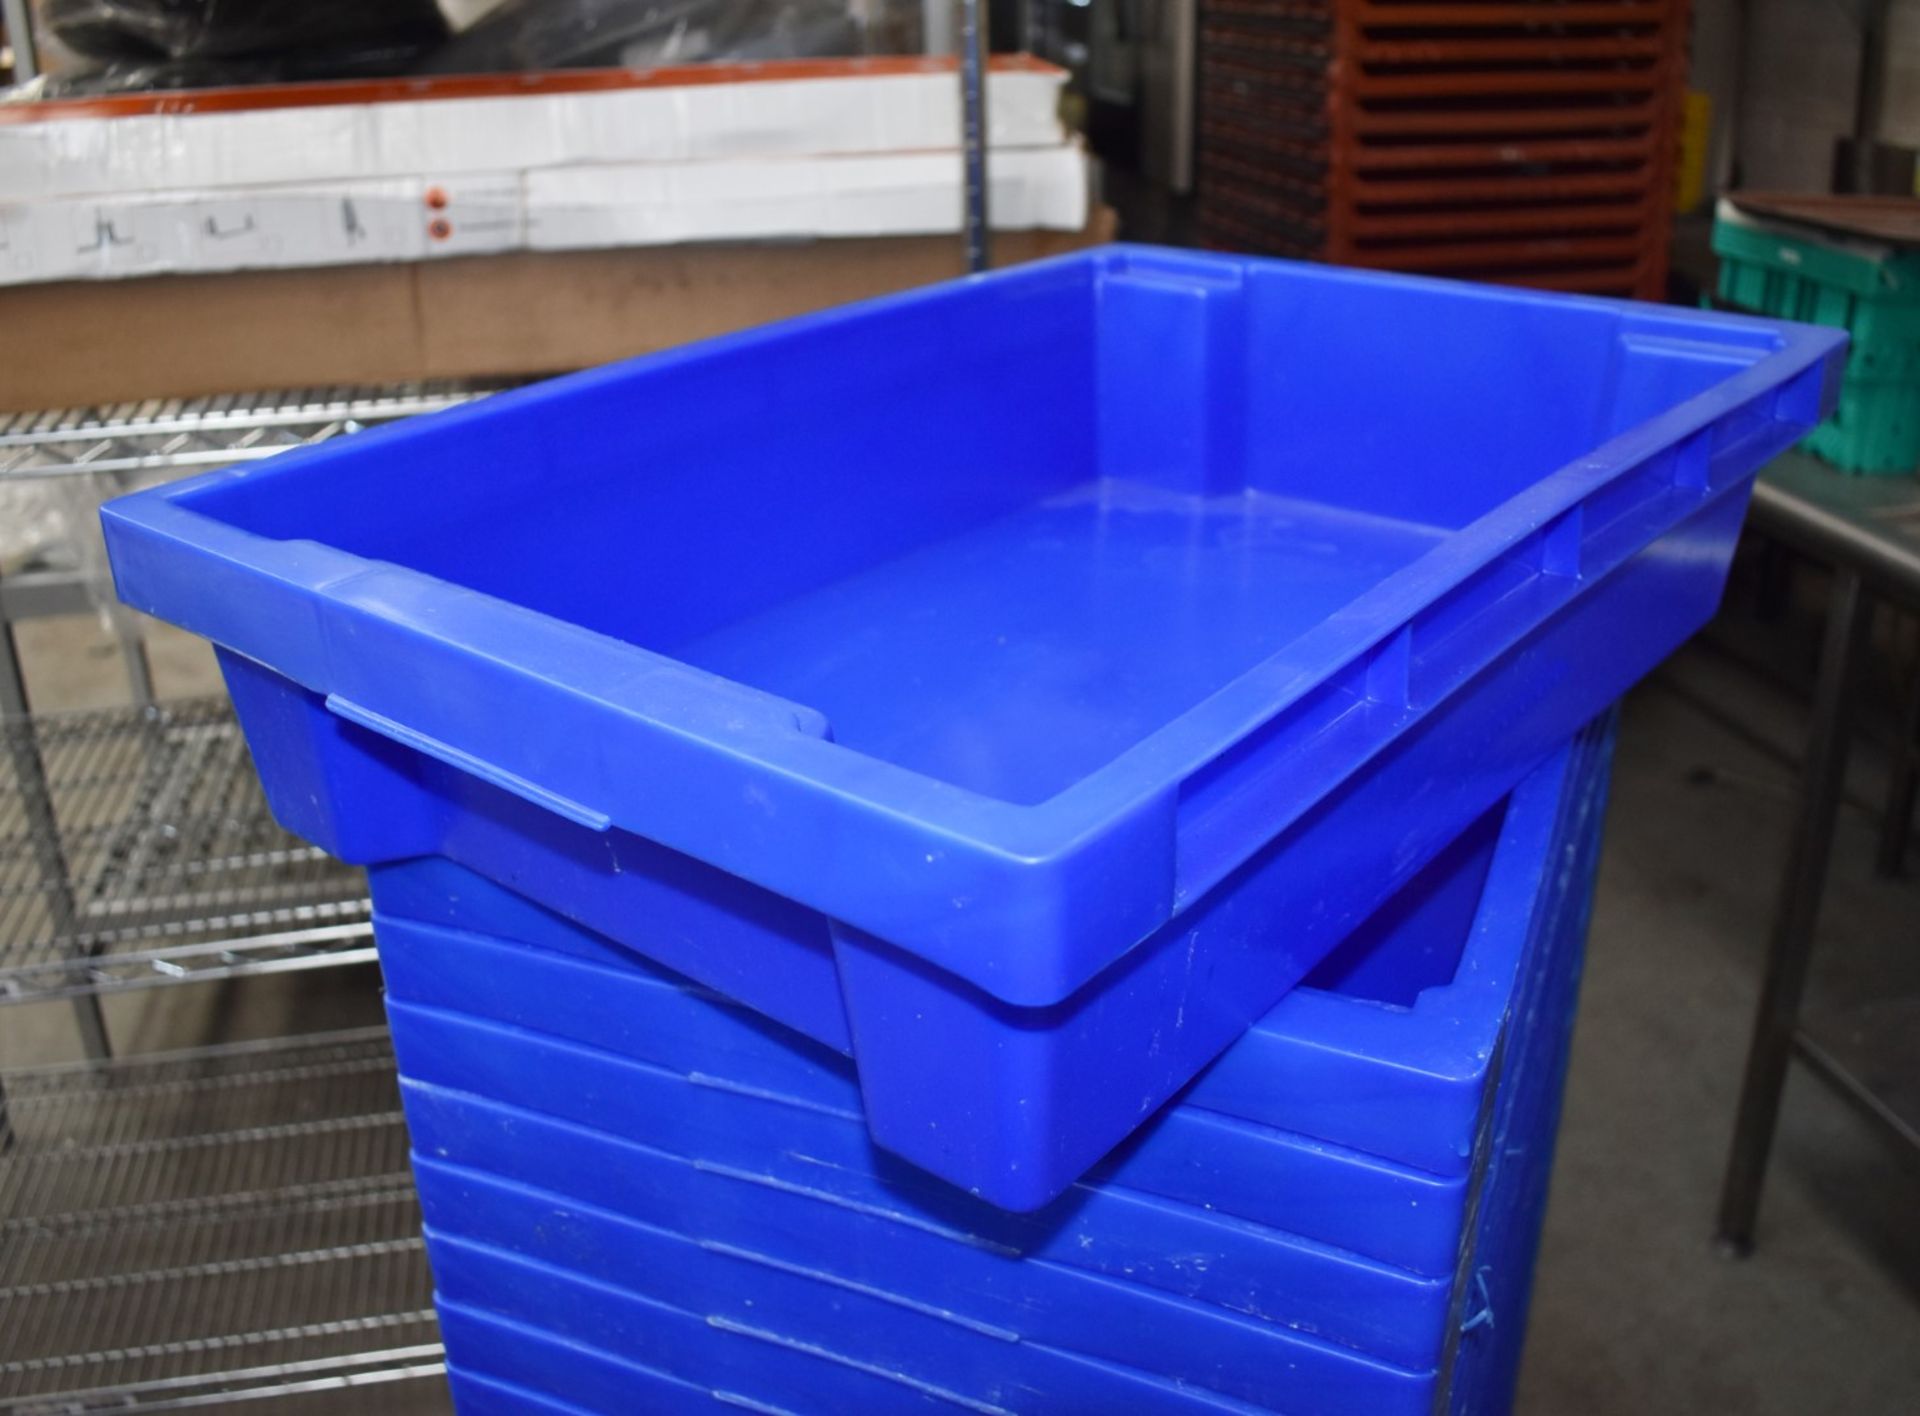 27 x Plastic Stackable Storage Trays in Blue - Includes Mobile Platform Dolly on Castors - Tray - Image 5 of 7